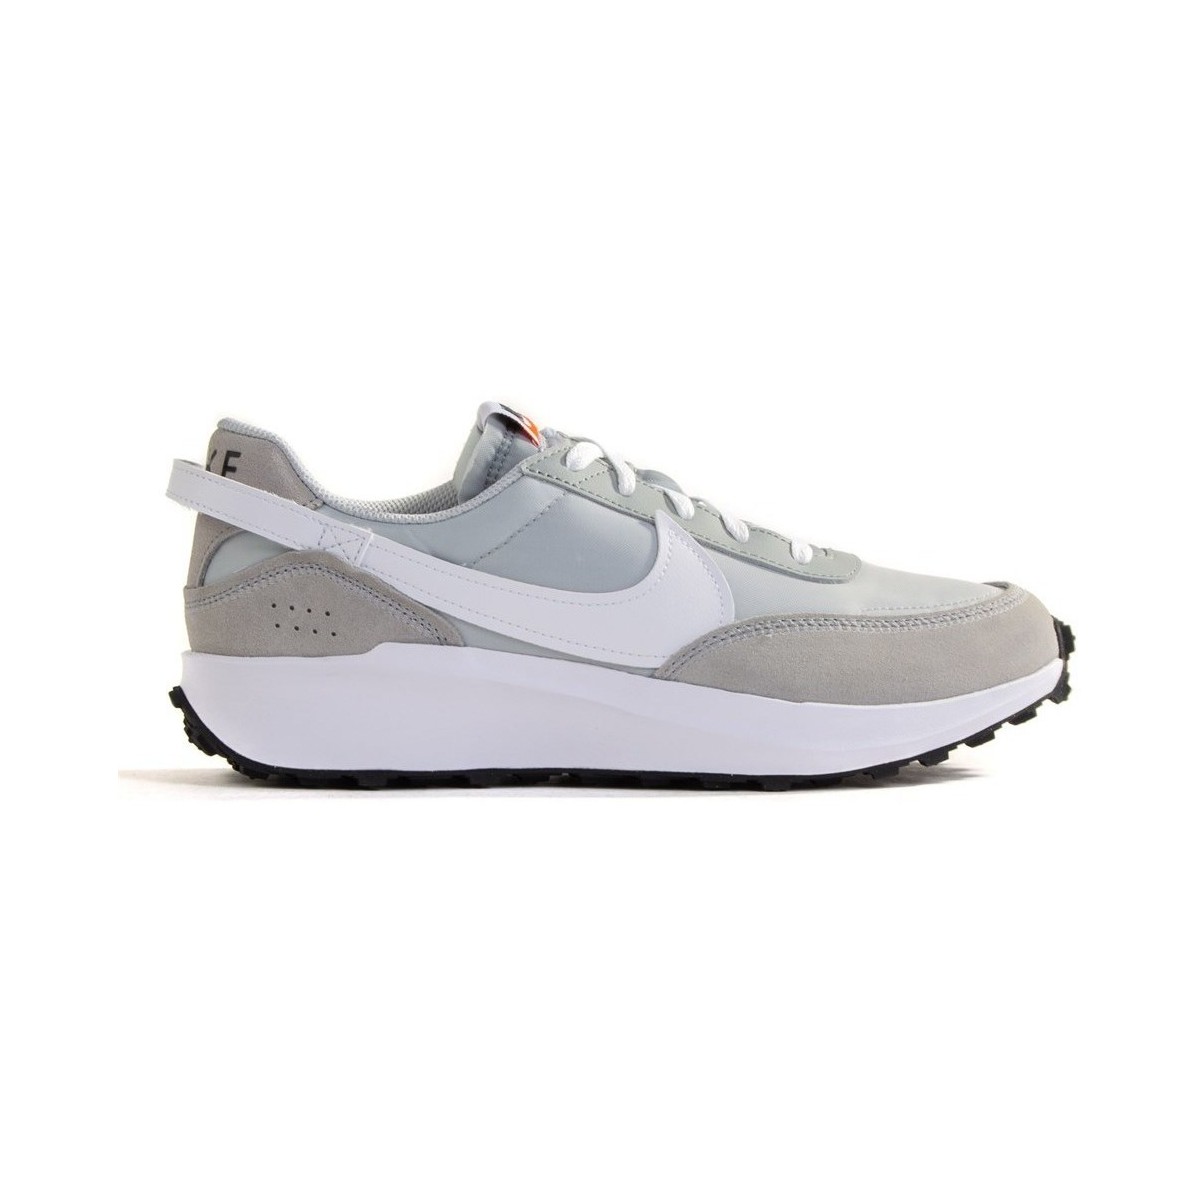 Chaussures Homme Baskets basses Nike Waffle Debut Gris